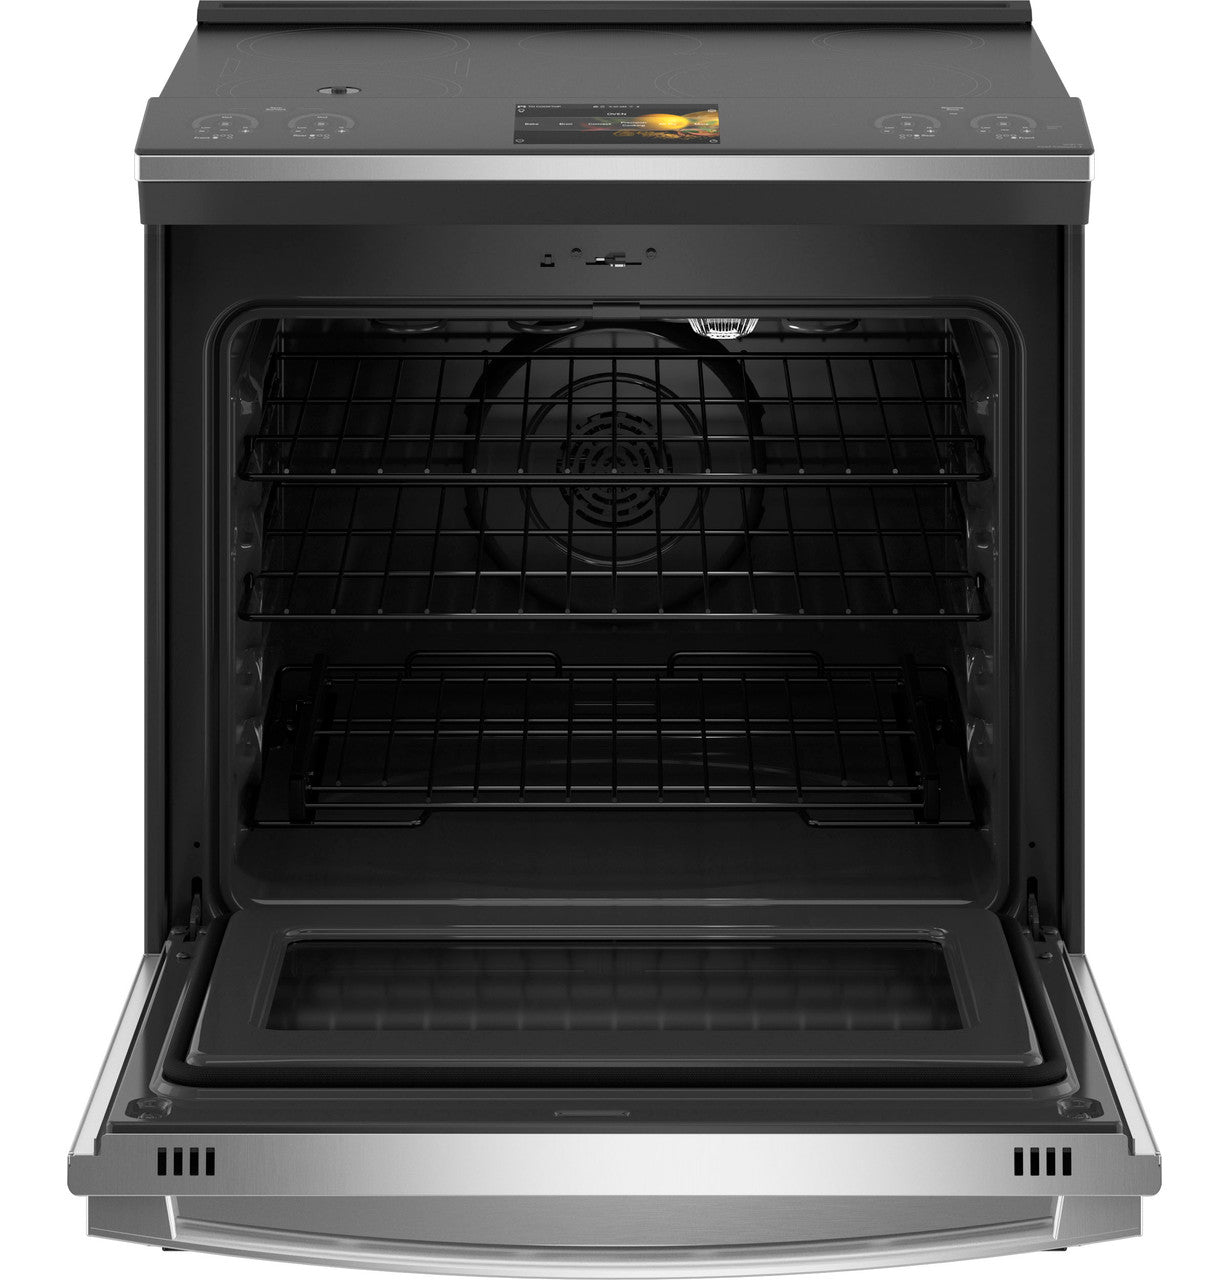 GE Profile - 5.3 cu. ft  Induction Range in Stainless - PHS93XYPFS